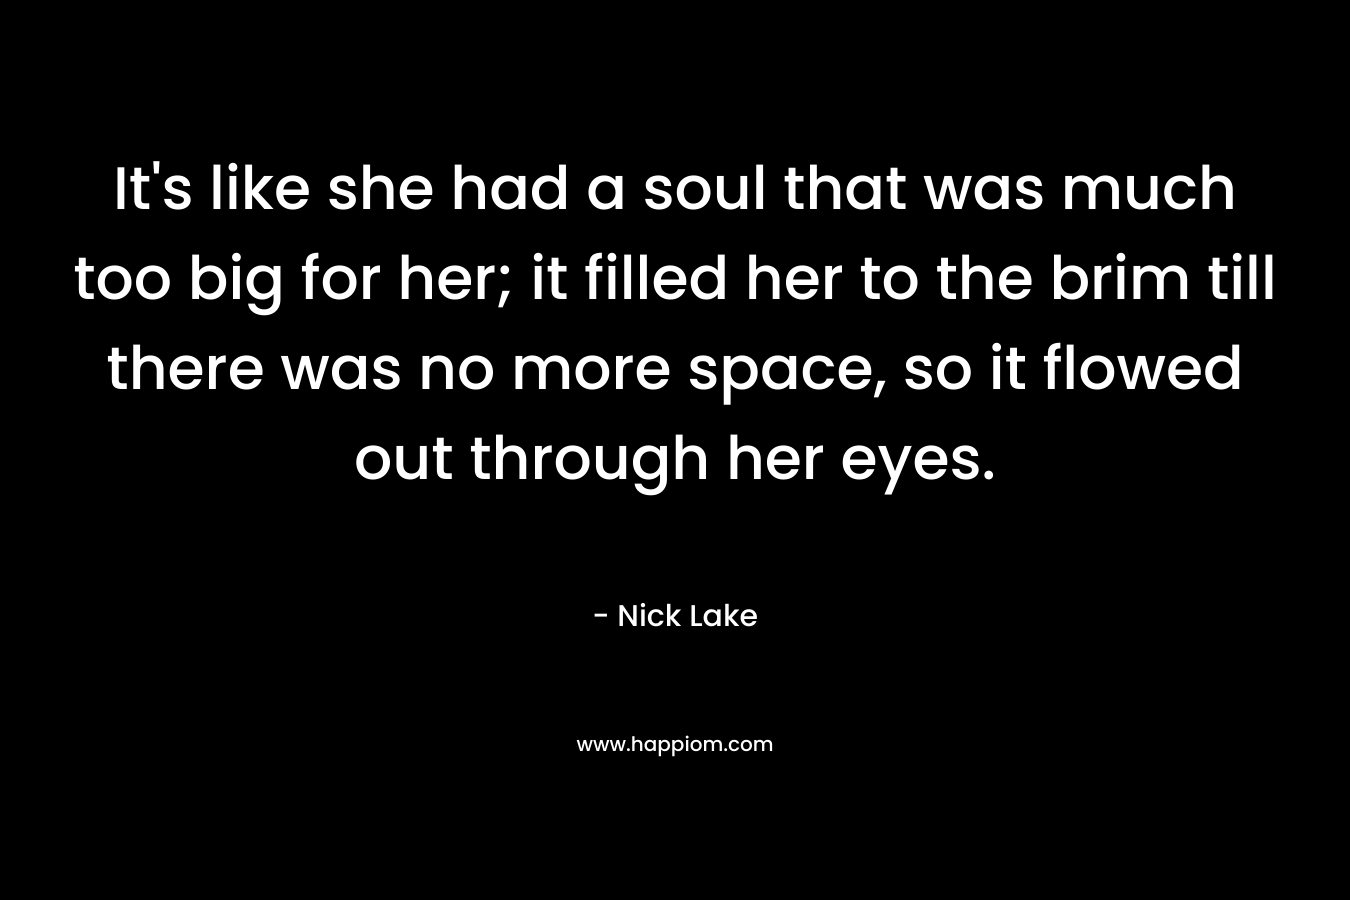 It’s like she had a soul that was much too big for her; it filled her to the brim till there was no more space, so it flowed out through her eyes. – Nick Lake